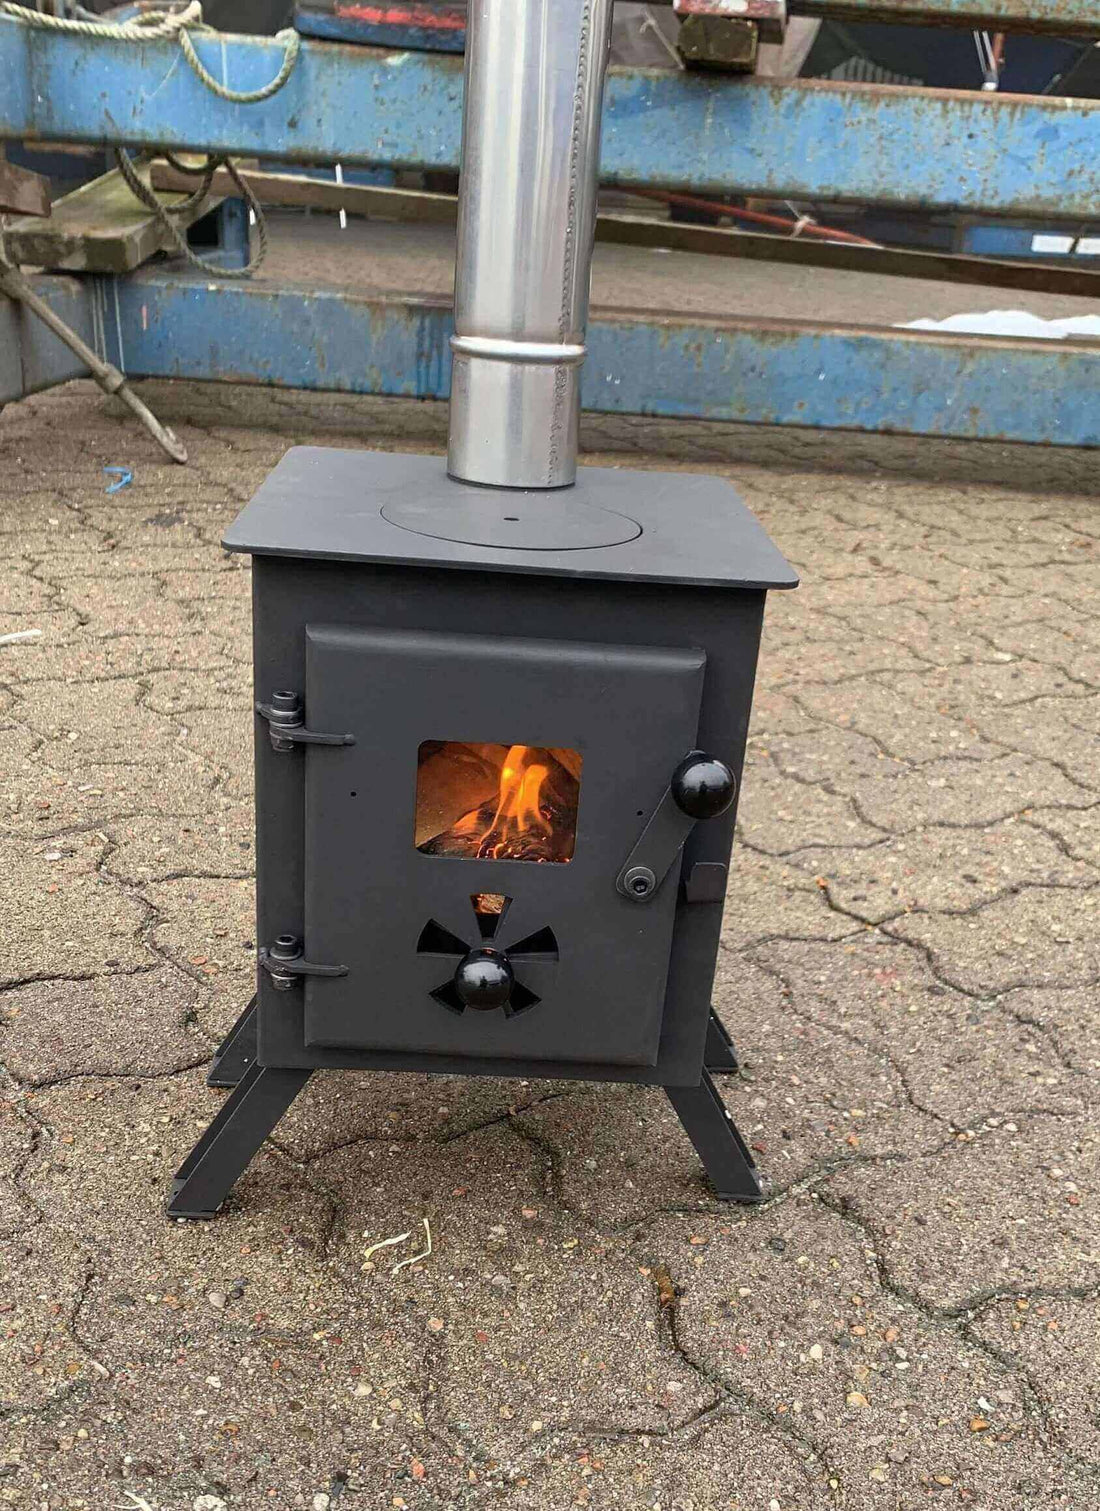 How to choose a wood stove for a tiny house?